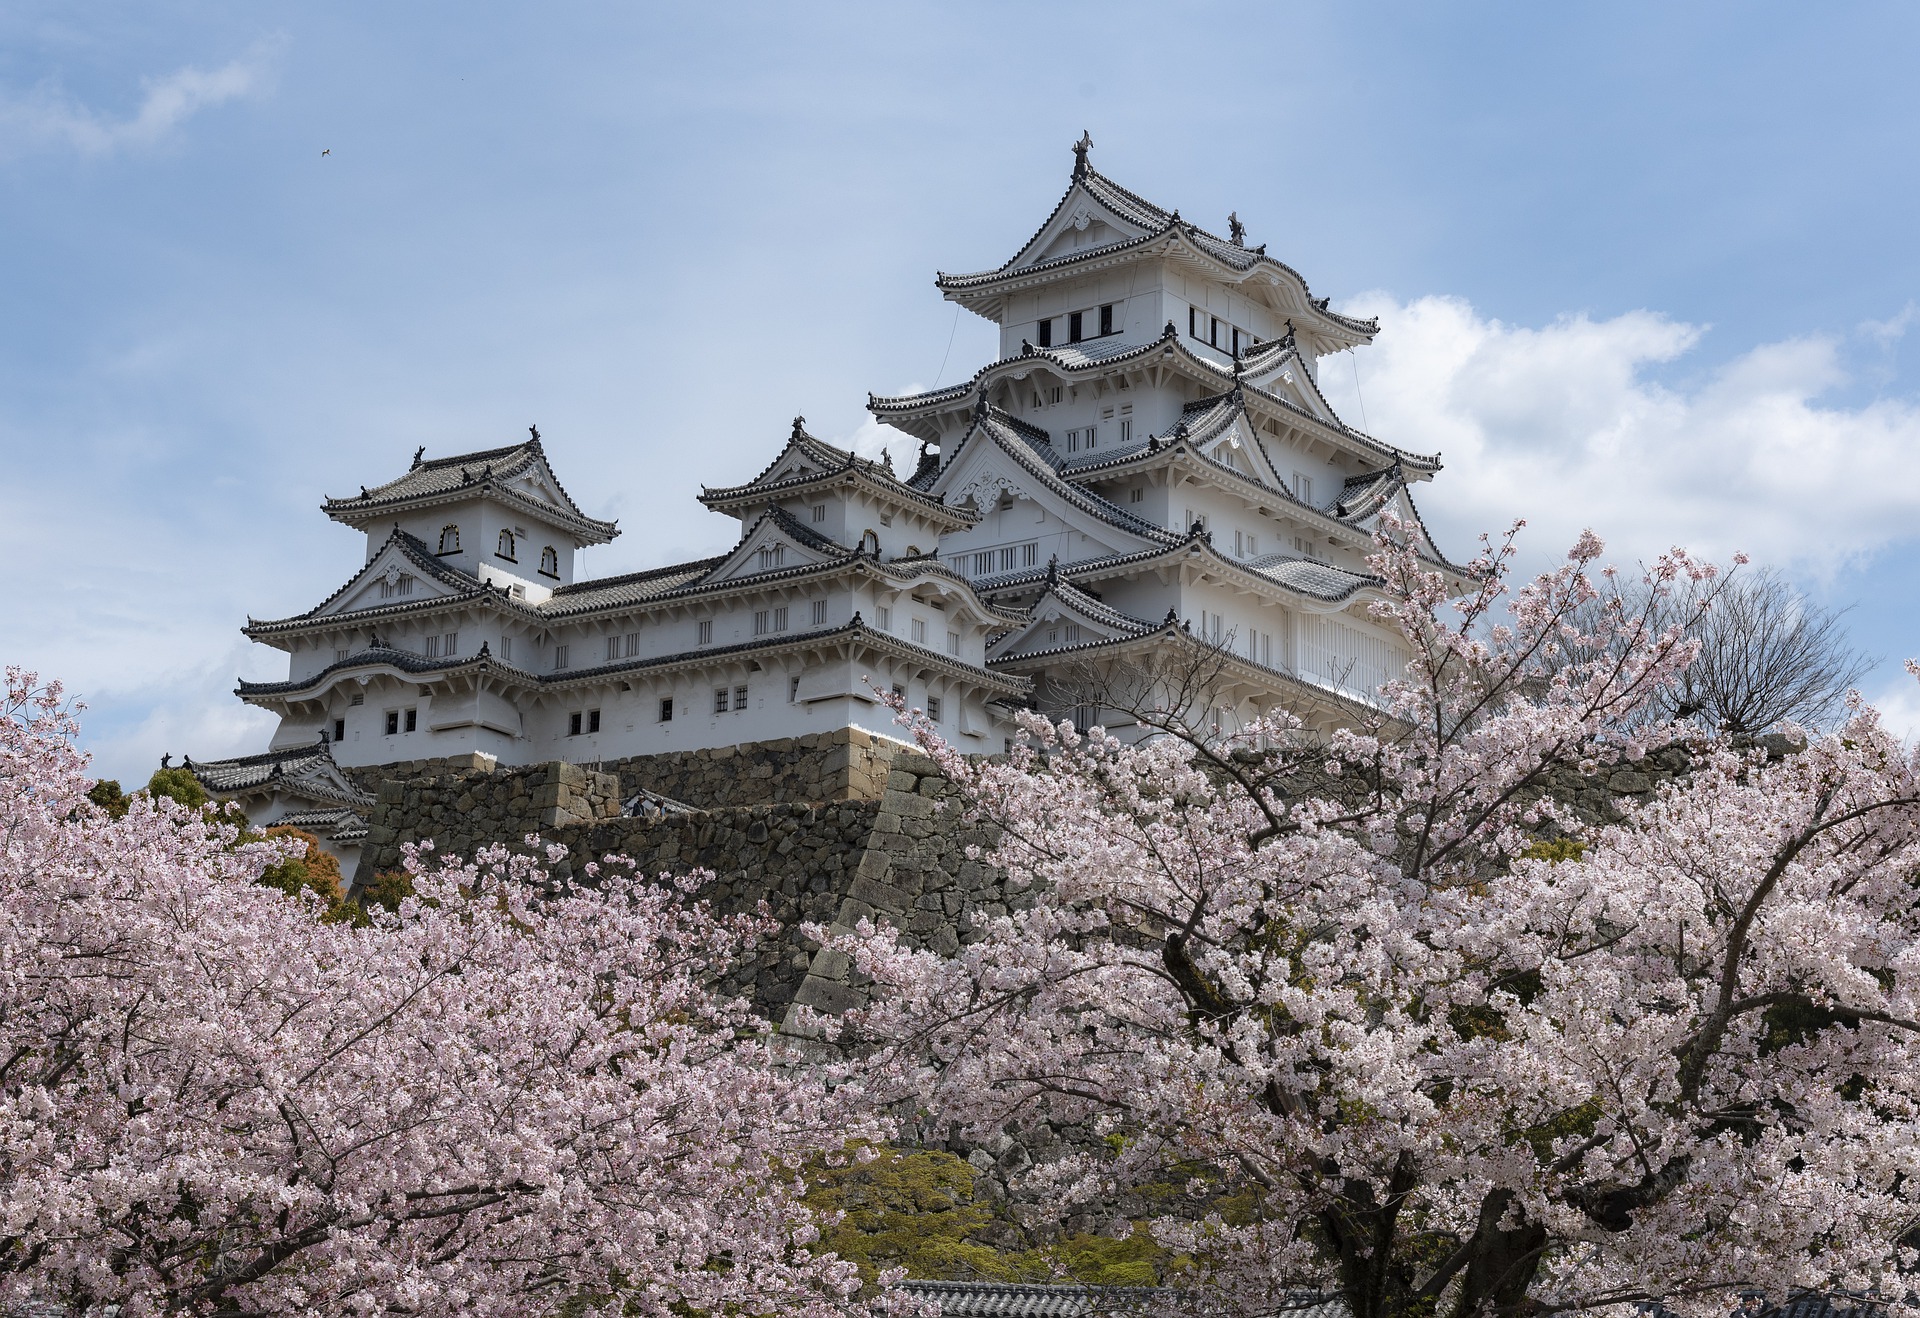 The most beautiful castles in the world in Japan